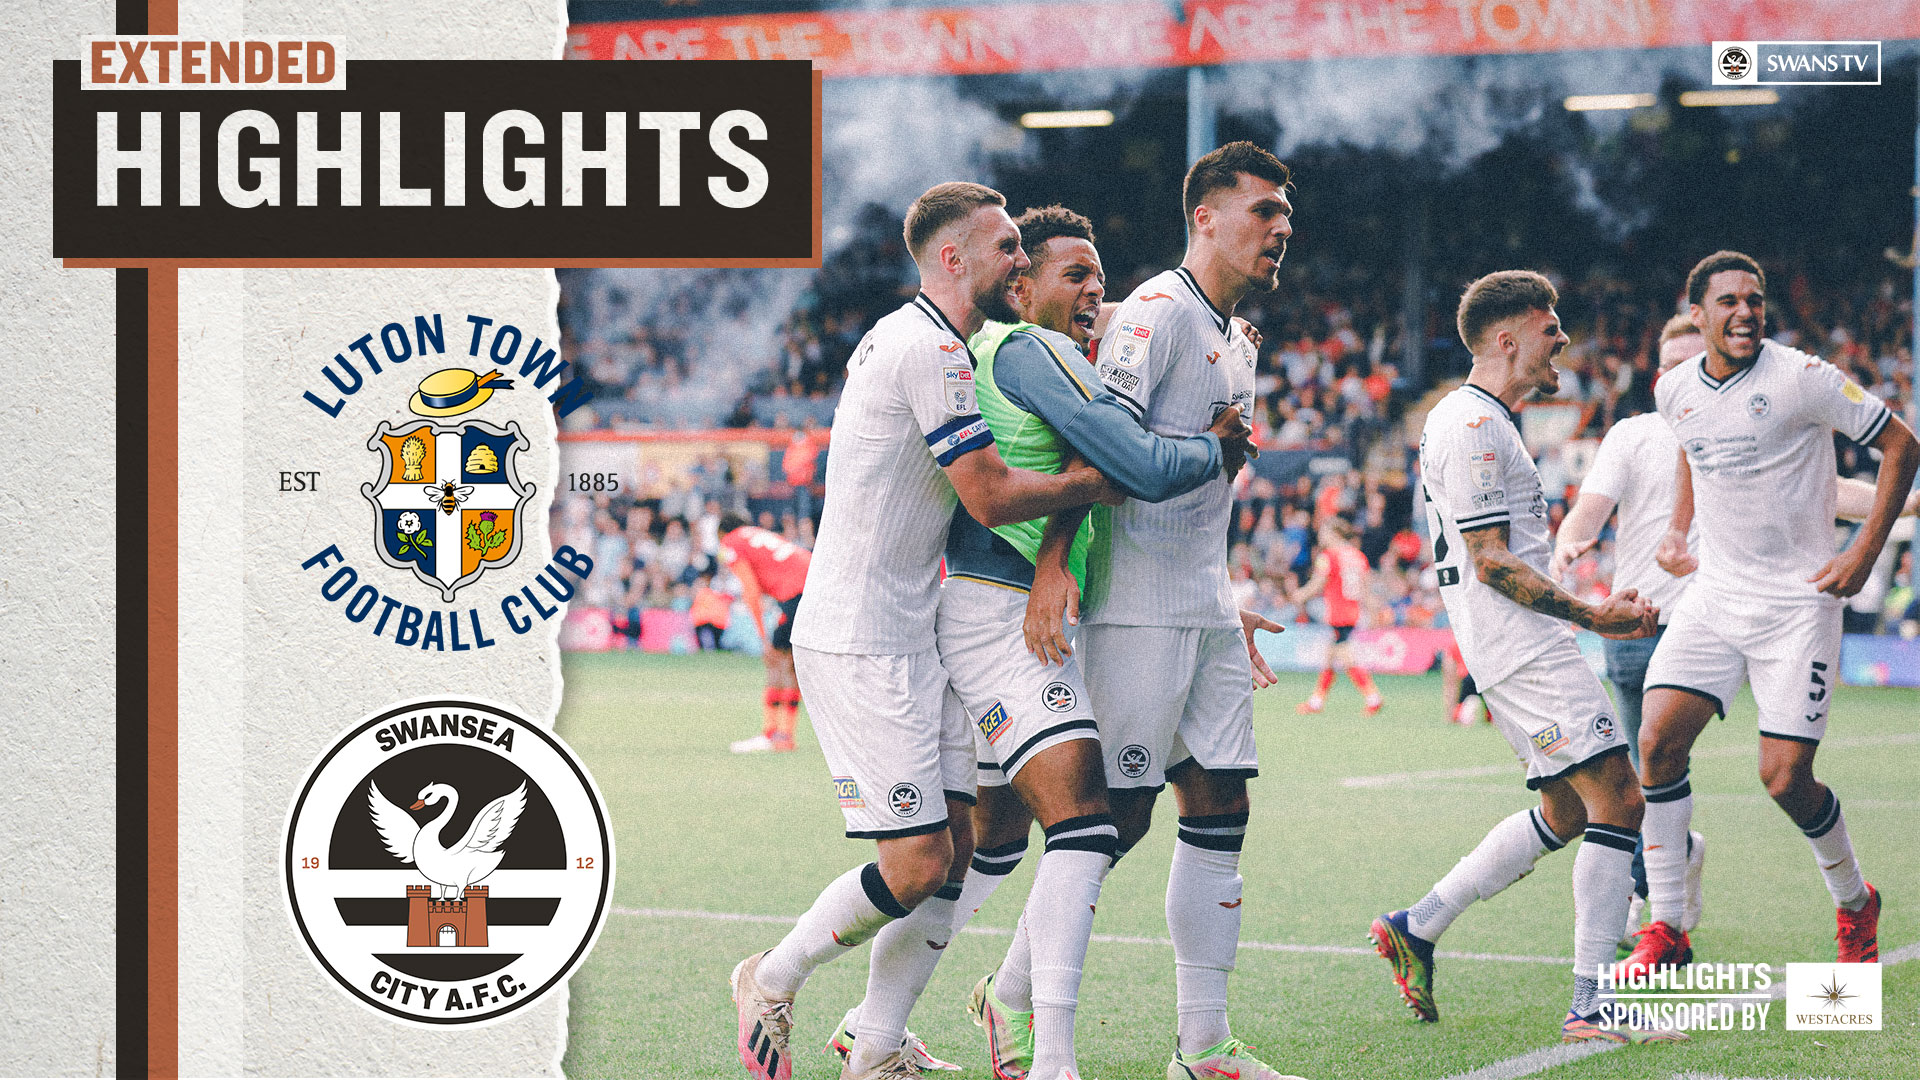 Luton (a) extended highlights thumbnail